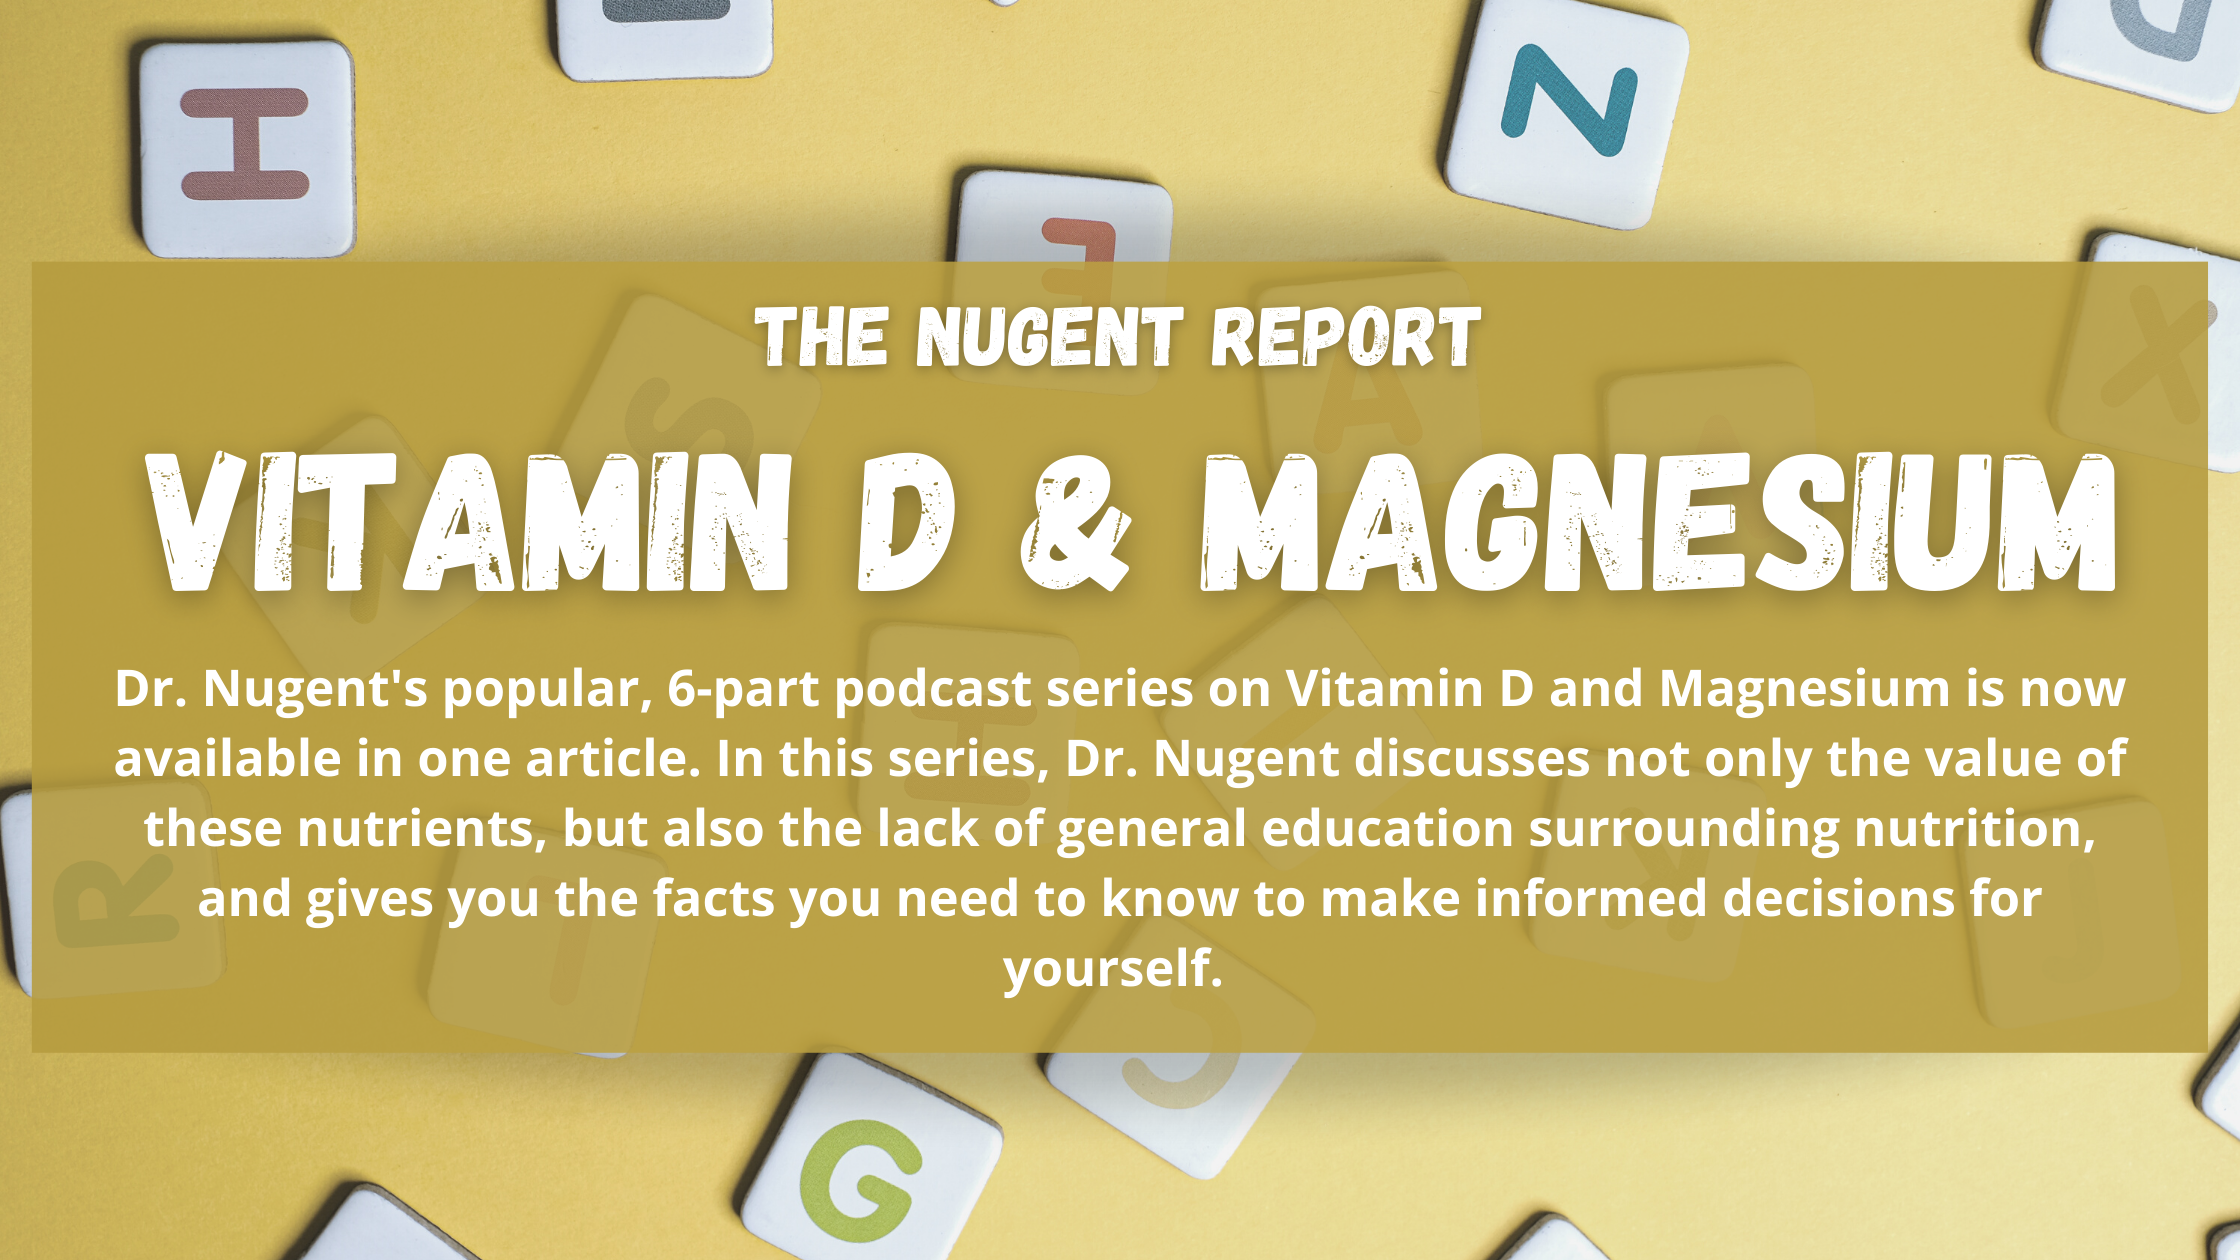 Vitamin D and Magnesium: Are you getting enough? Probably not